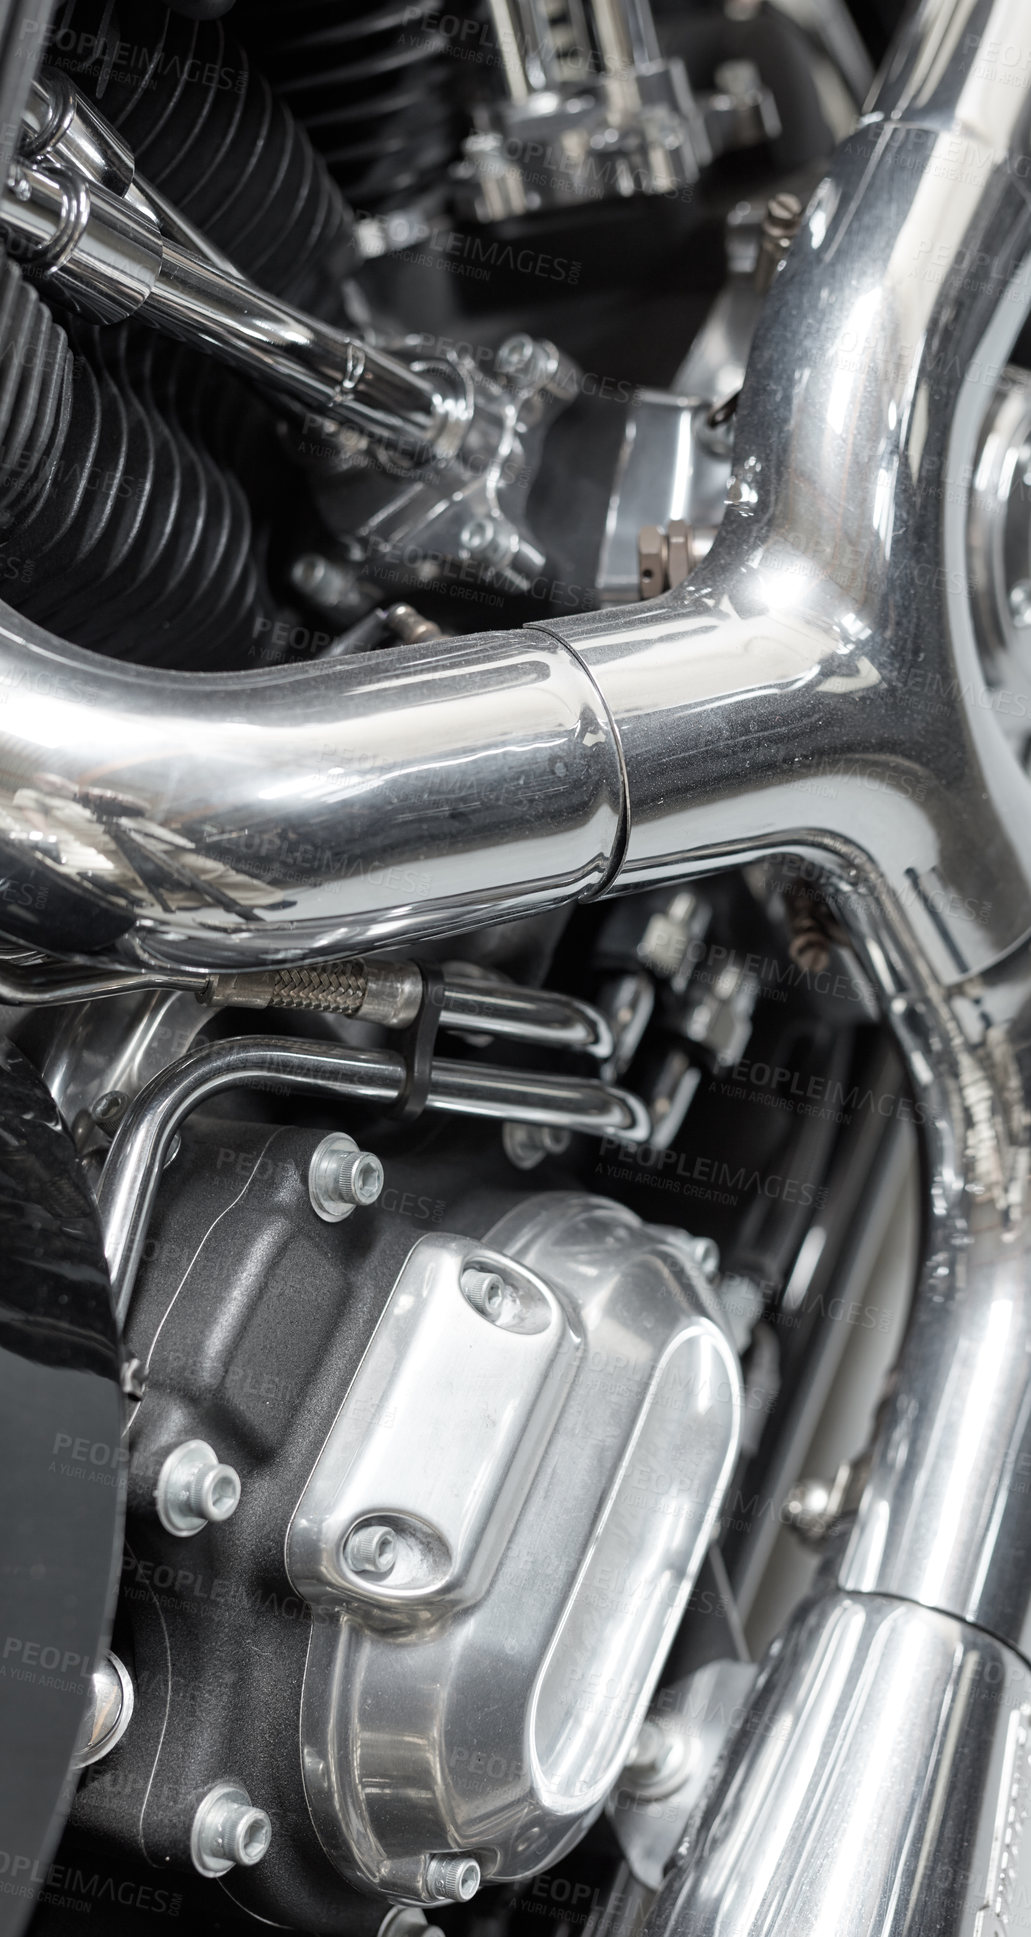 Buy stock photo Closeup of an old classic retro style motorbike with full shiny chrome finish. Detail view of the engine and frame on an vintage motor cycle with black cylinders, shiny chrome pipes and bolts